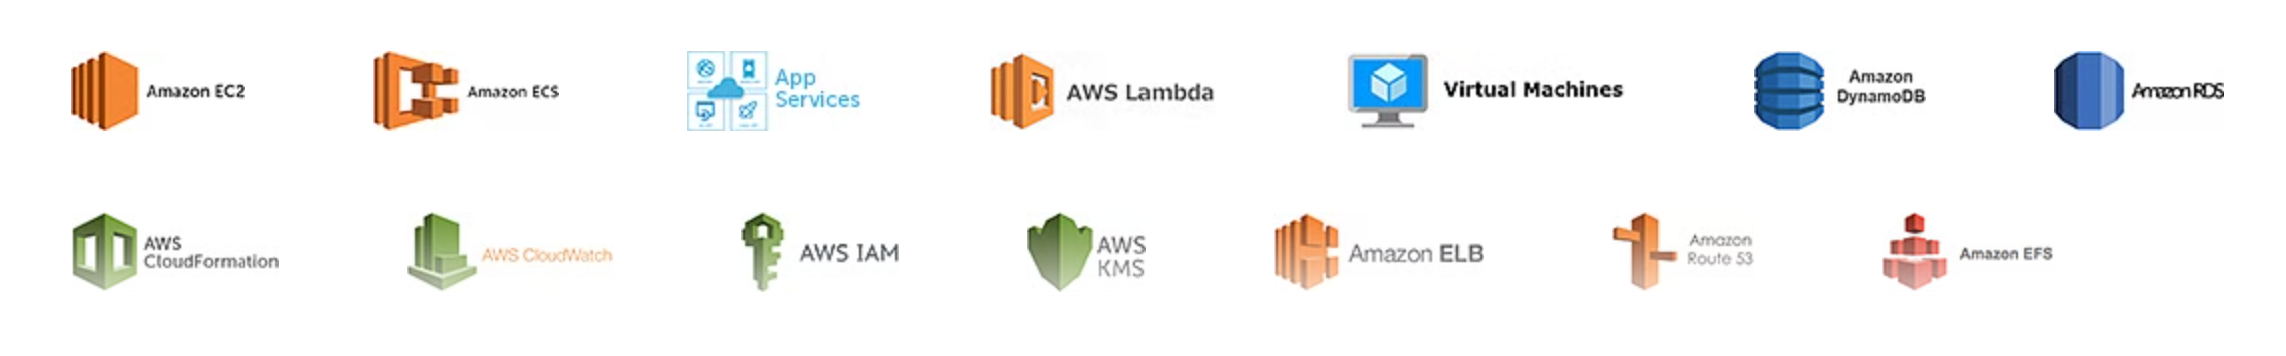 Aws cloud architect masters program option 1 the aws cloud architect training is a comprehensive program aimed at helping you master the essential skills needed to design and deploy dynamic, scalable, highly available, fault-tolerant, and reliable applications on aws ,one of the world’s leading cloud platforms. With this aws training, you’ll gain an in-depth understanding of aws terminology, concepts, advantages, and deployment choices that match your business needs.